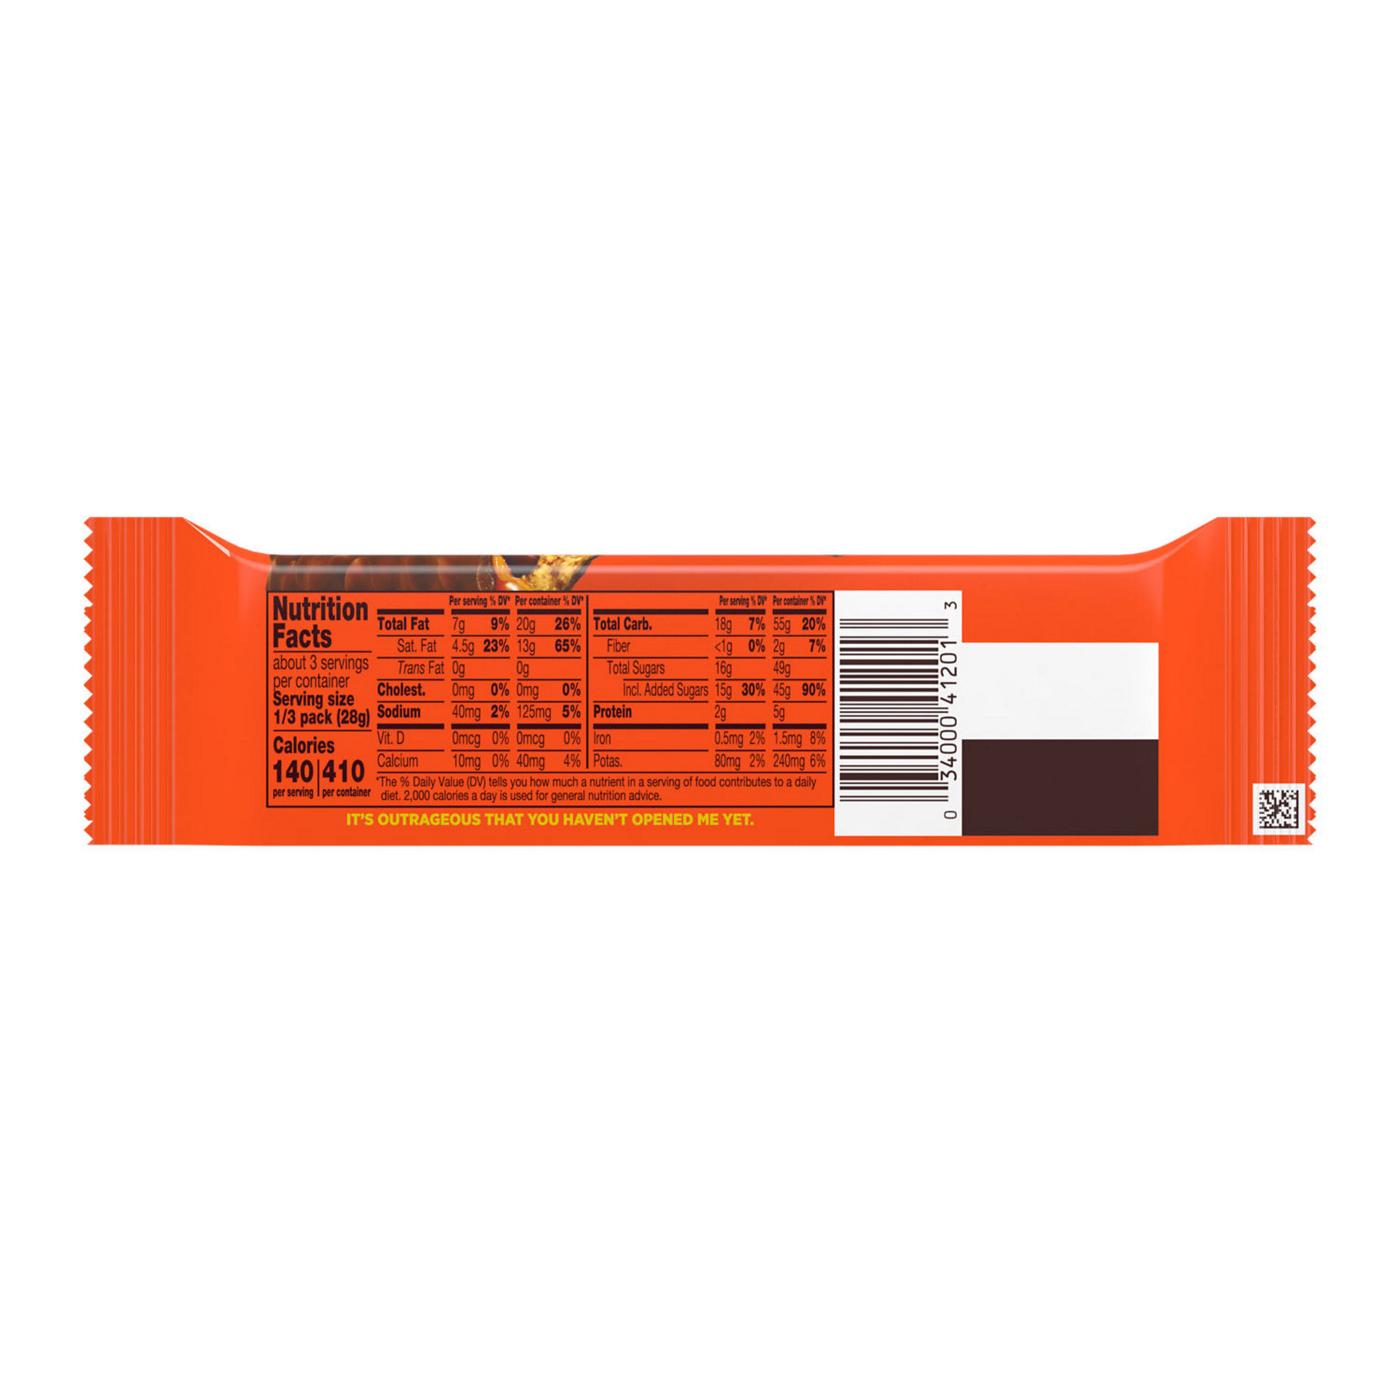 Reese's Outrageous! Milk Chocolate Peanut Butter Candy Bar - King Size; image 2 of 7